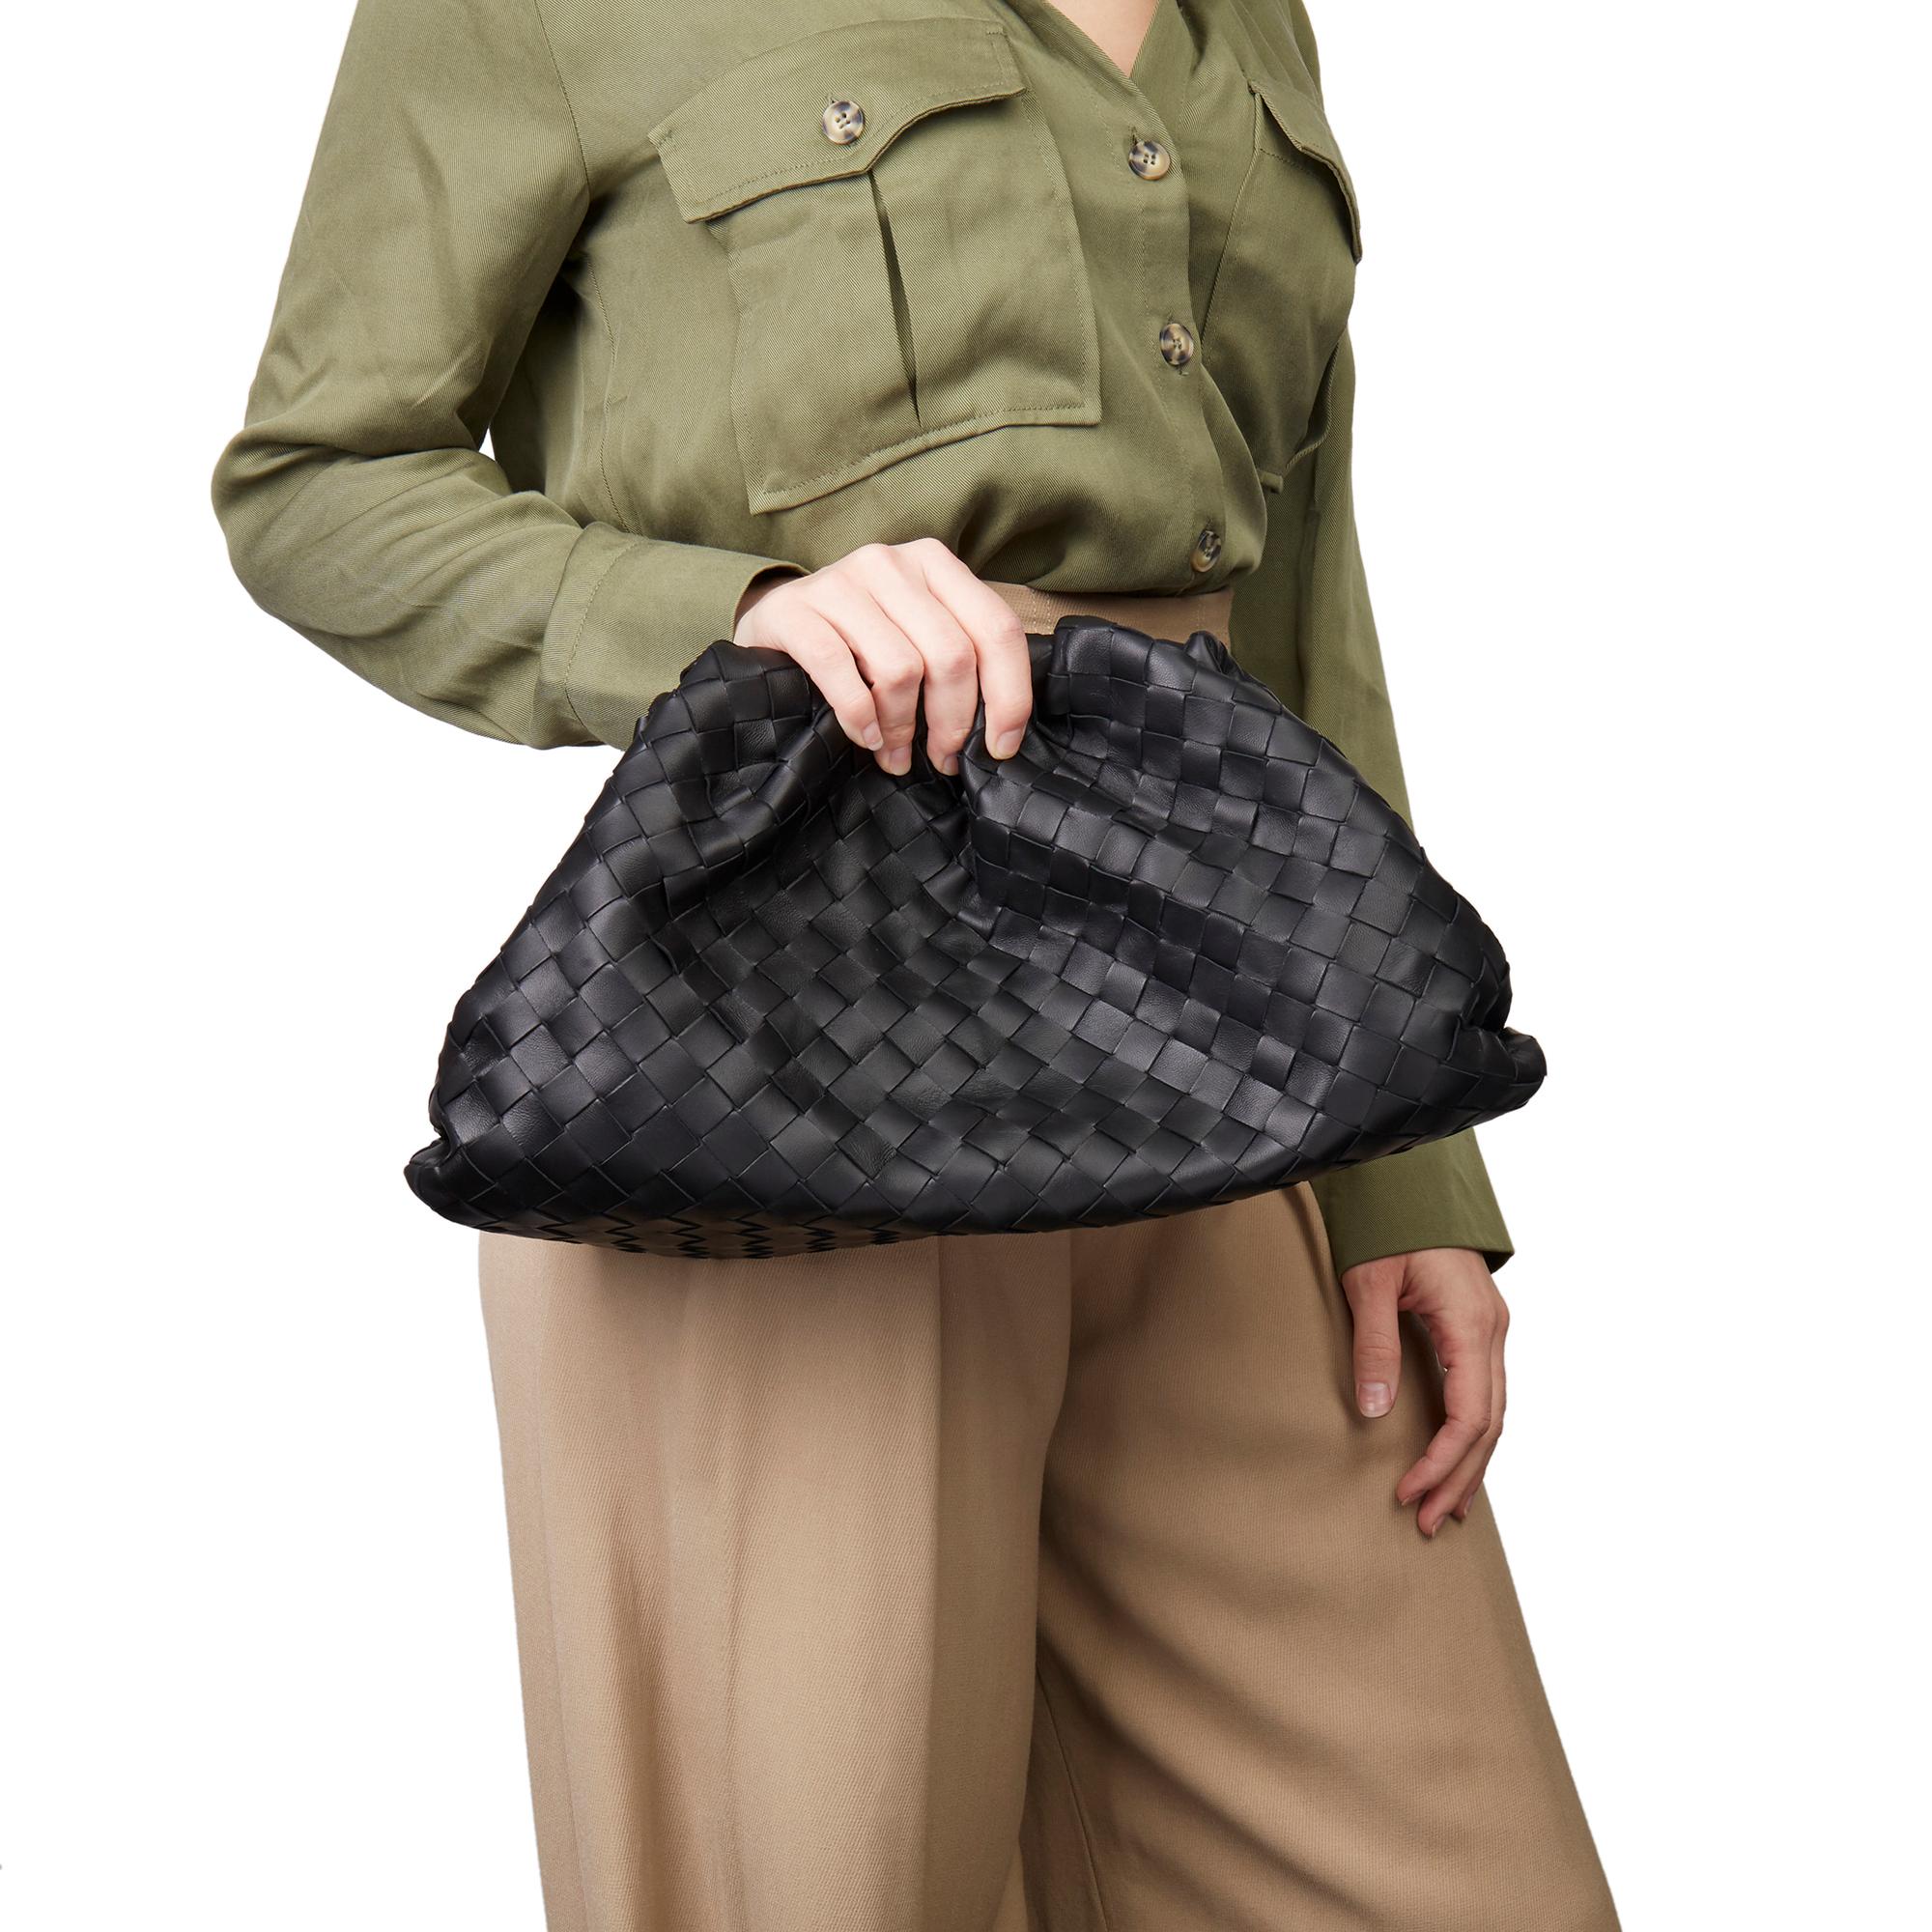 BOTTEGA VENETA
Black Woven Lambskin The Pouch

Xupes Reference: HB3238
Serial Number: B08448046I
Age (Circa): 2019
Accompanied By: Bottega Veneta Dust Bag, Care Booklet, Harrods Receipt
Authenticity Details: Serial Tag (Made in Italy)
Gender: